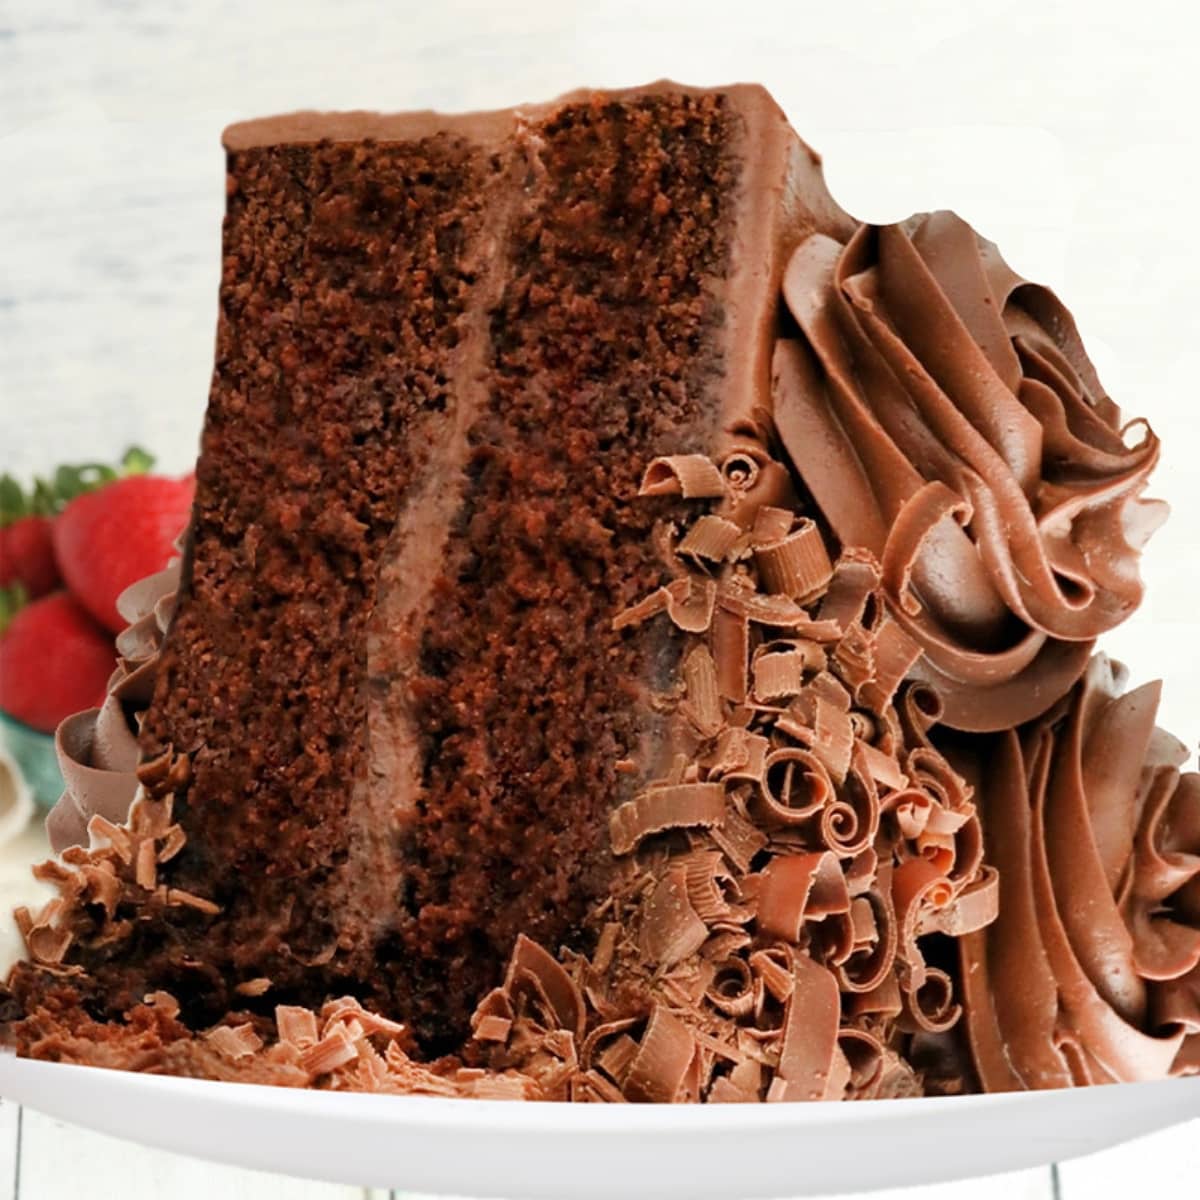 Chocolate-Candy Bar Layer Cake Recipe | Food Network Kitchen | Food Network